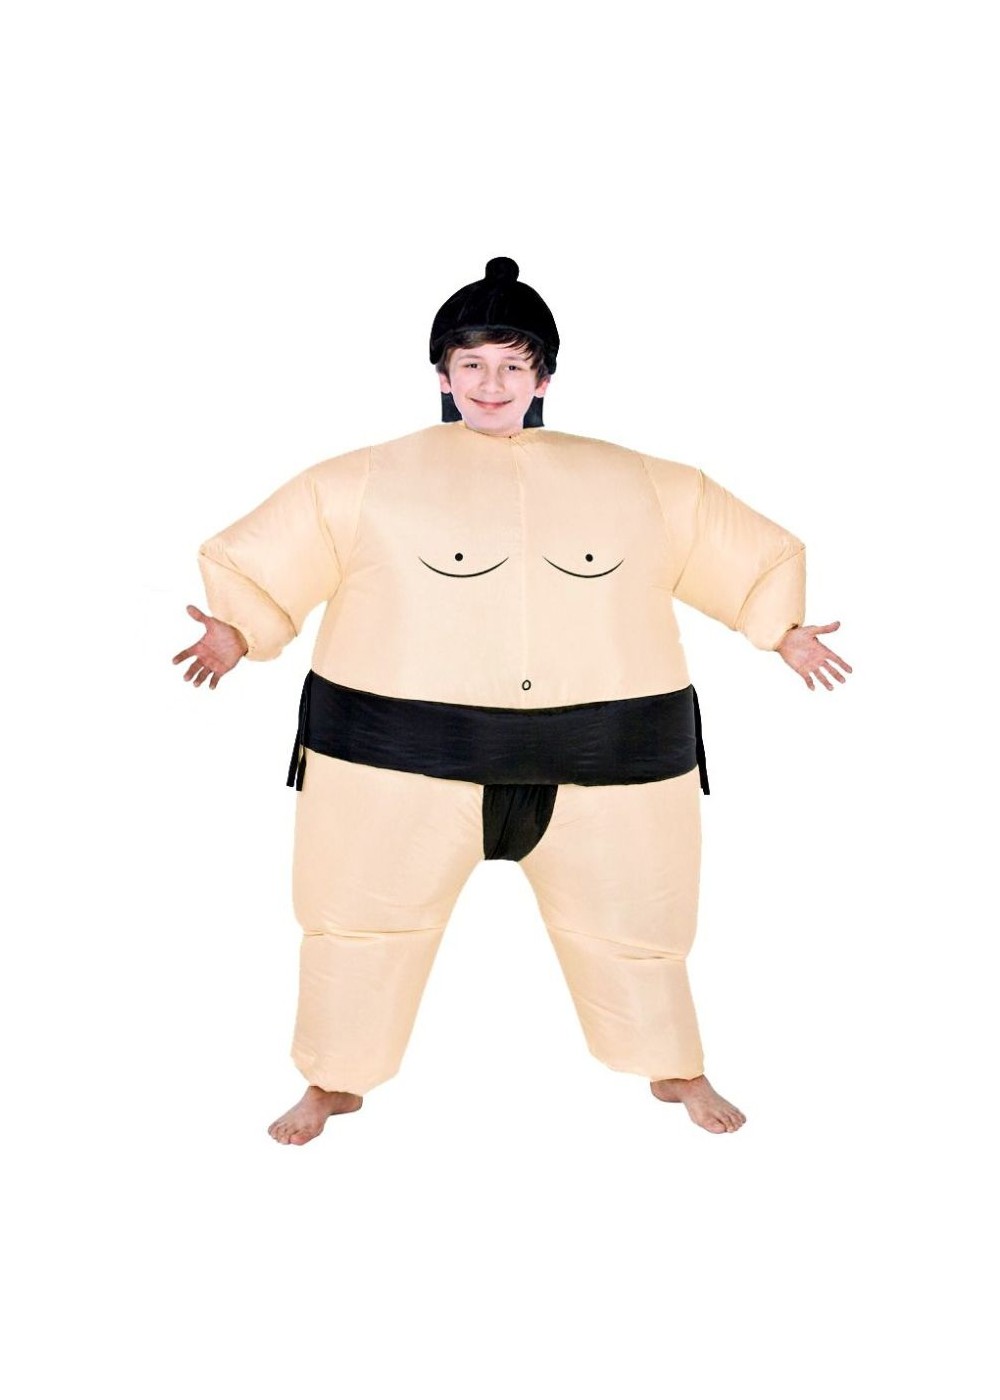 Kids Inflatable Sumo Wrestling Costume Wrestler Suit Boy Girl Fancy Dress Outfit